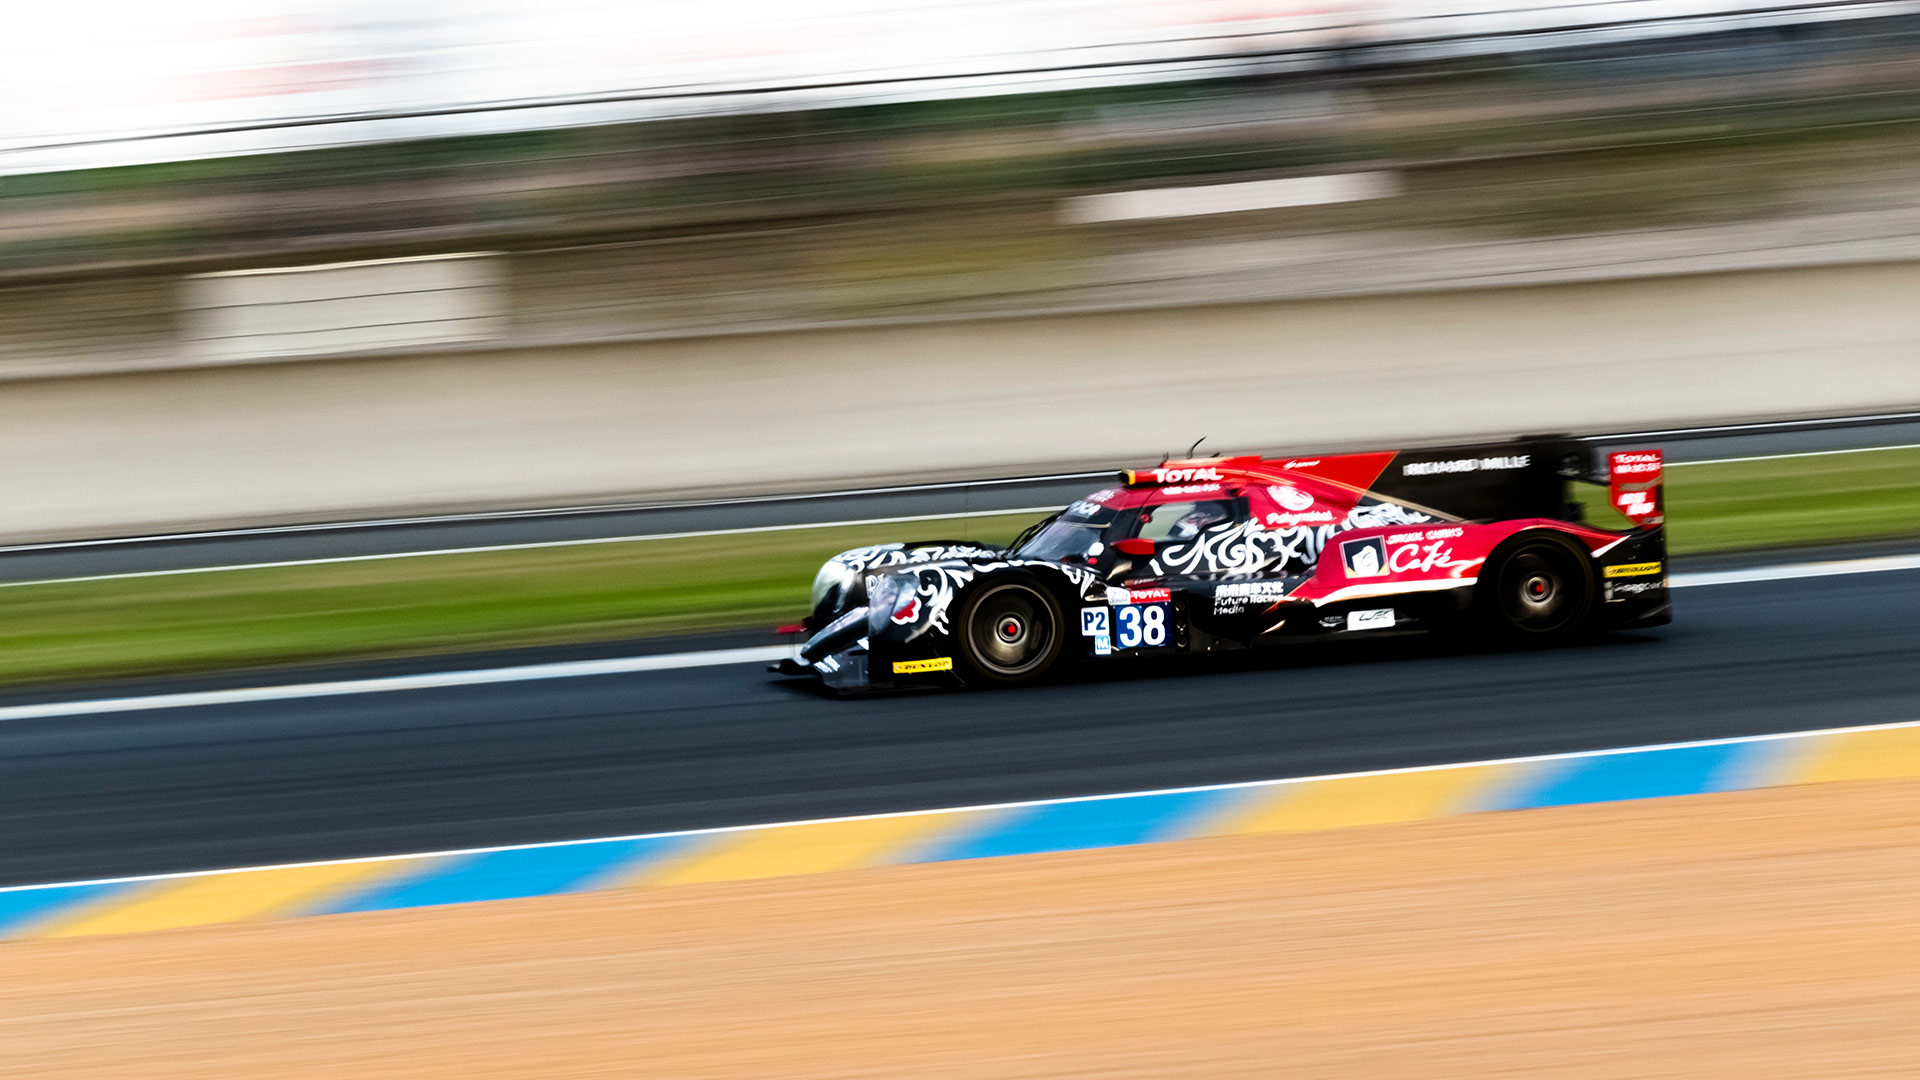 24 Hour Le Mans Racing - MAT Foundry